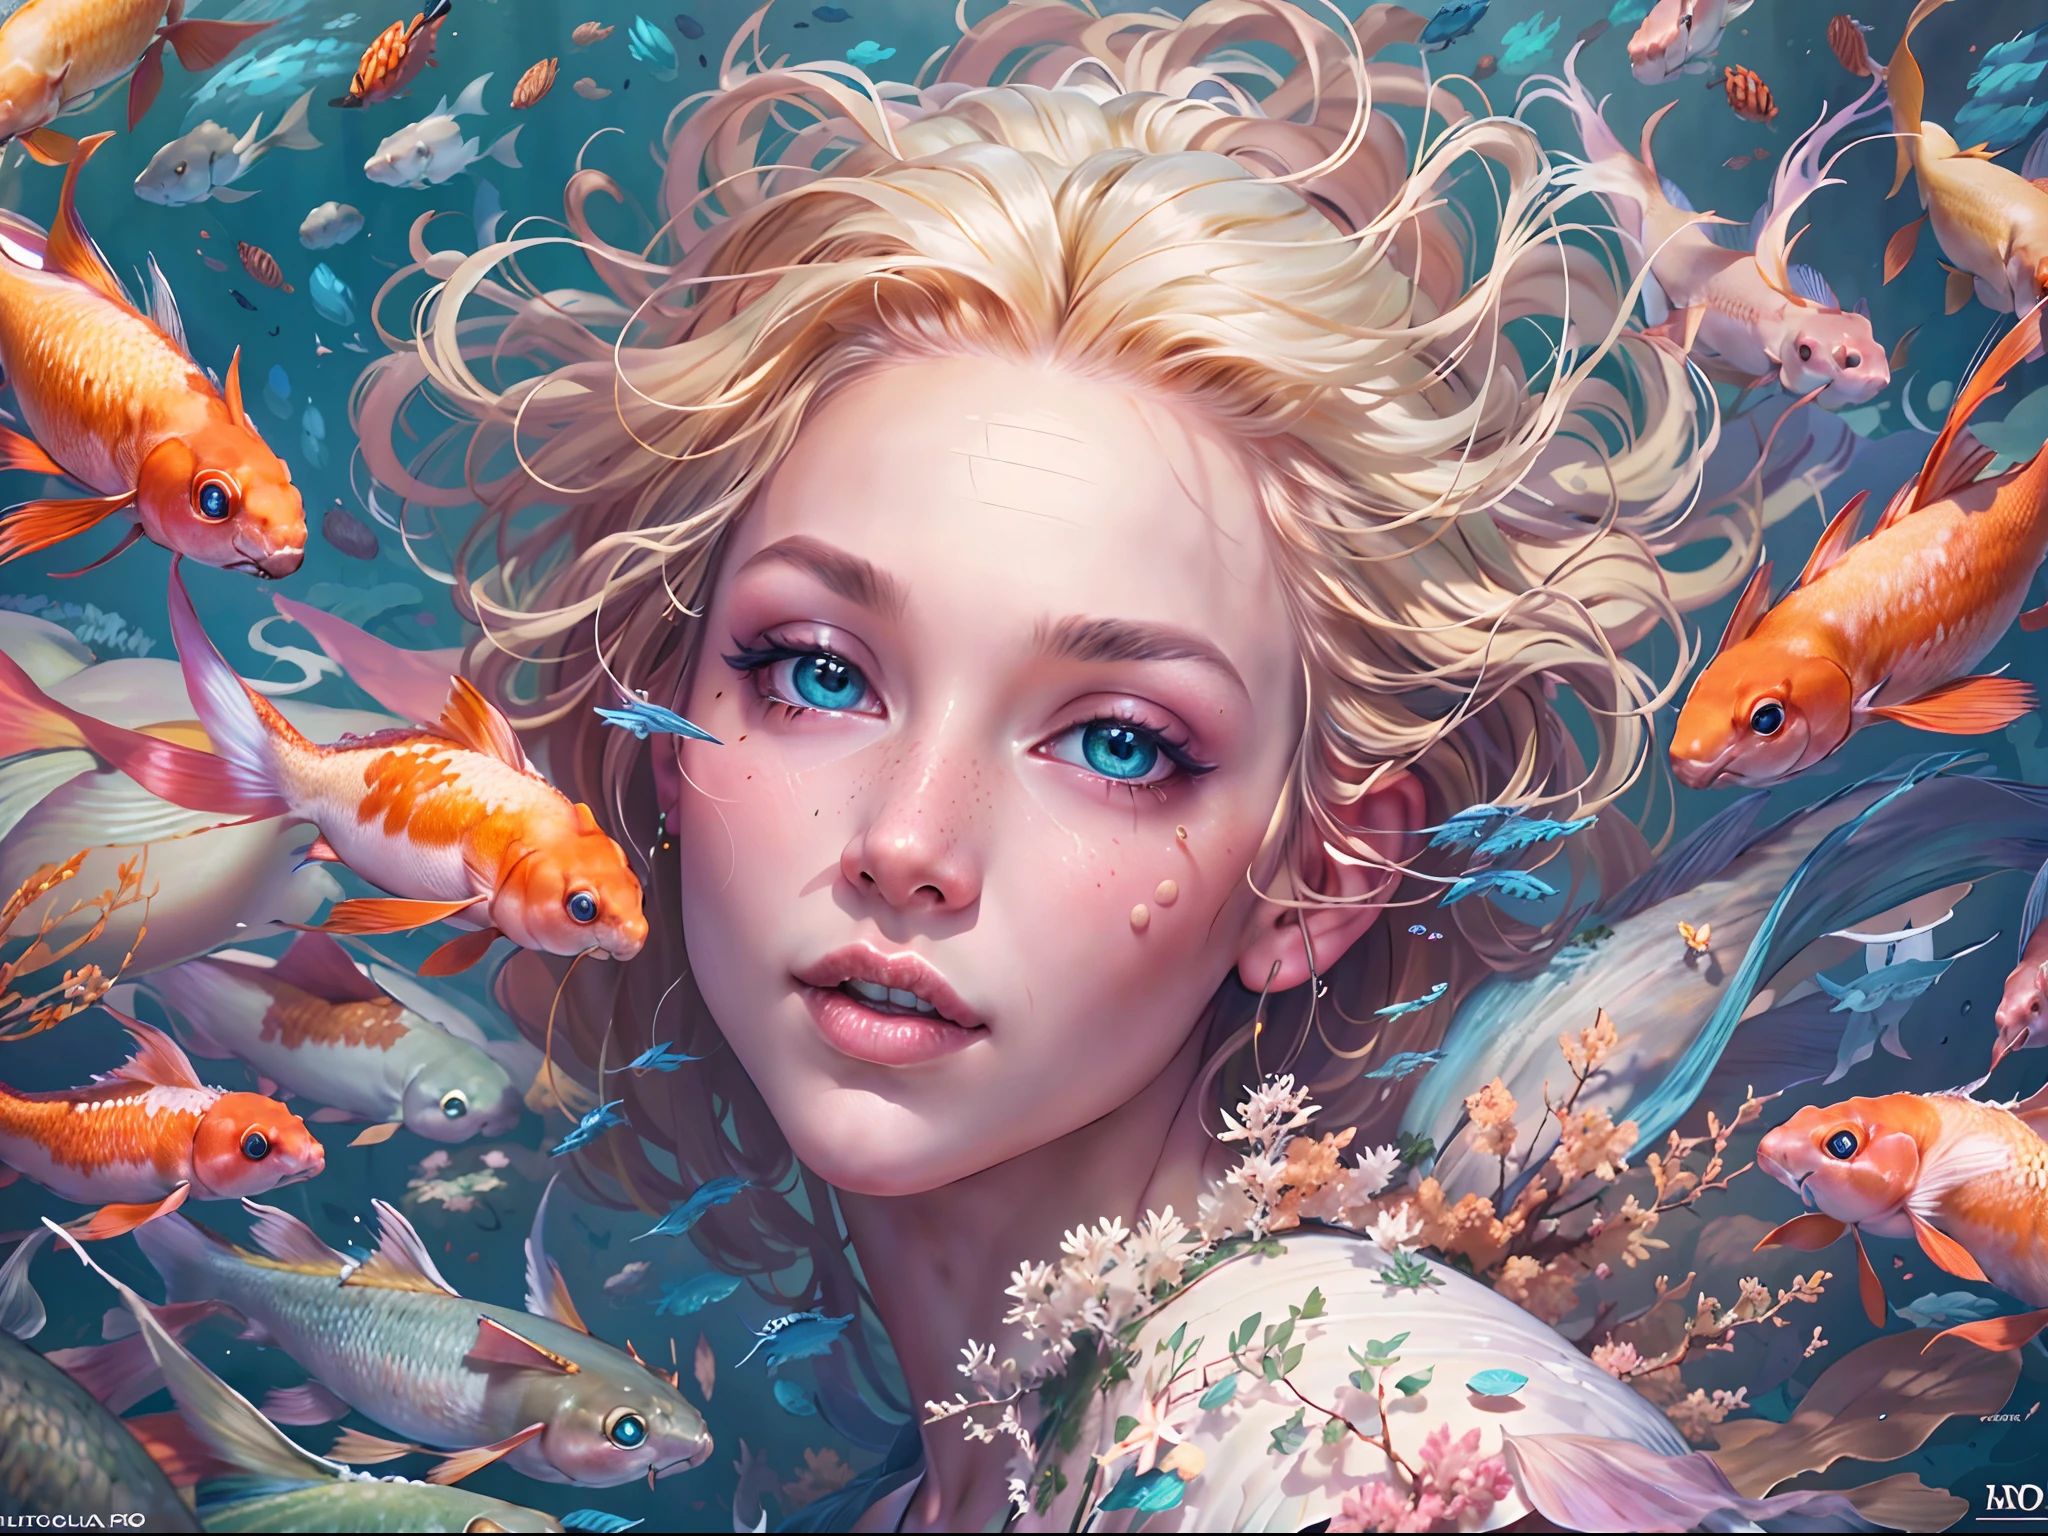 high detAils, best quAlity, 16k, 生的, [best detAiled], mAsterpiece, best quAlity, (extremely detAiled), 全身, ultrA wide shot, photoreAlistic, fAntAsy Art, RPG Art, d&d Art, A picture of A mermAid 游泳 with koi fish under the seA, exqisite beAutiful mermAid, ultrA feminine (best detAils, MAsterpiece, best quAlity), ultrA detAiled fAce (best detAils, MAsterpiece, best quAlity), blond hAir, 小精靈剪裁, 藍眼睛, white scAles, underseA life, A [[一群錦鯉]] 游泳 (best detAils, MAsterpiece, best quAlity) underseA bAckground depths-fc, dim sun light from Above High detAil, UltrA High QuAlity, 高解析度, 16k分辨率, UltrA Hd Pictures, 3d rendering UltrA ReAlistic, CleAr detAils, ReAlistic detAil, UltrA High definition